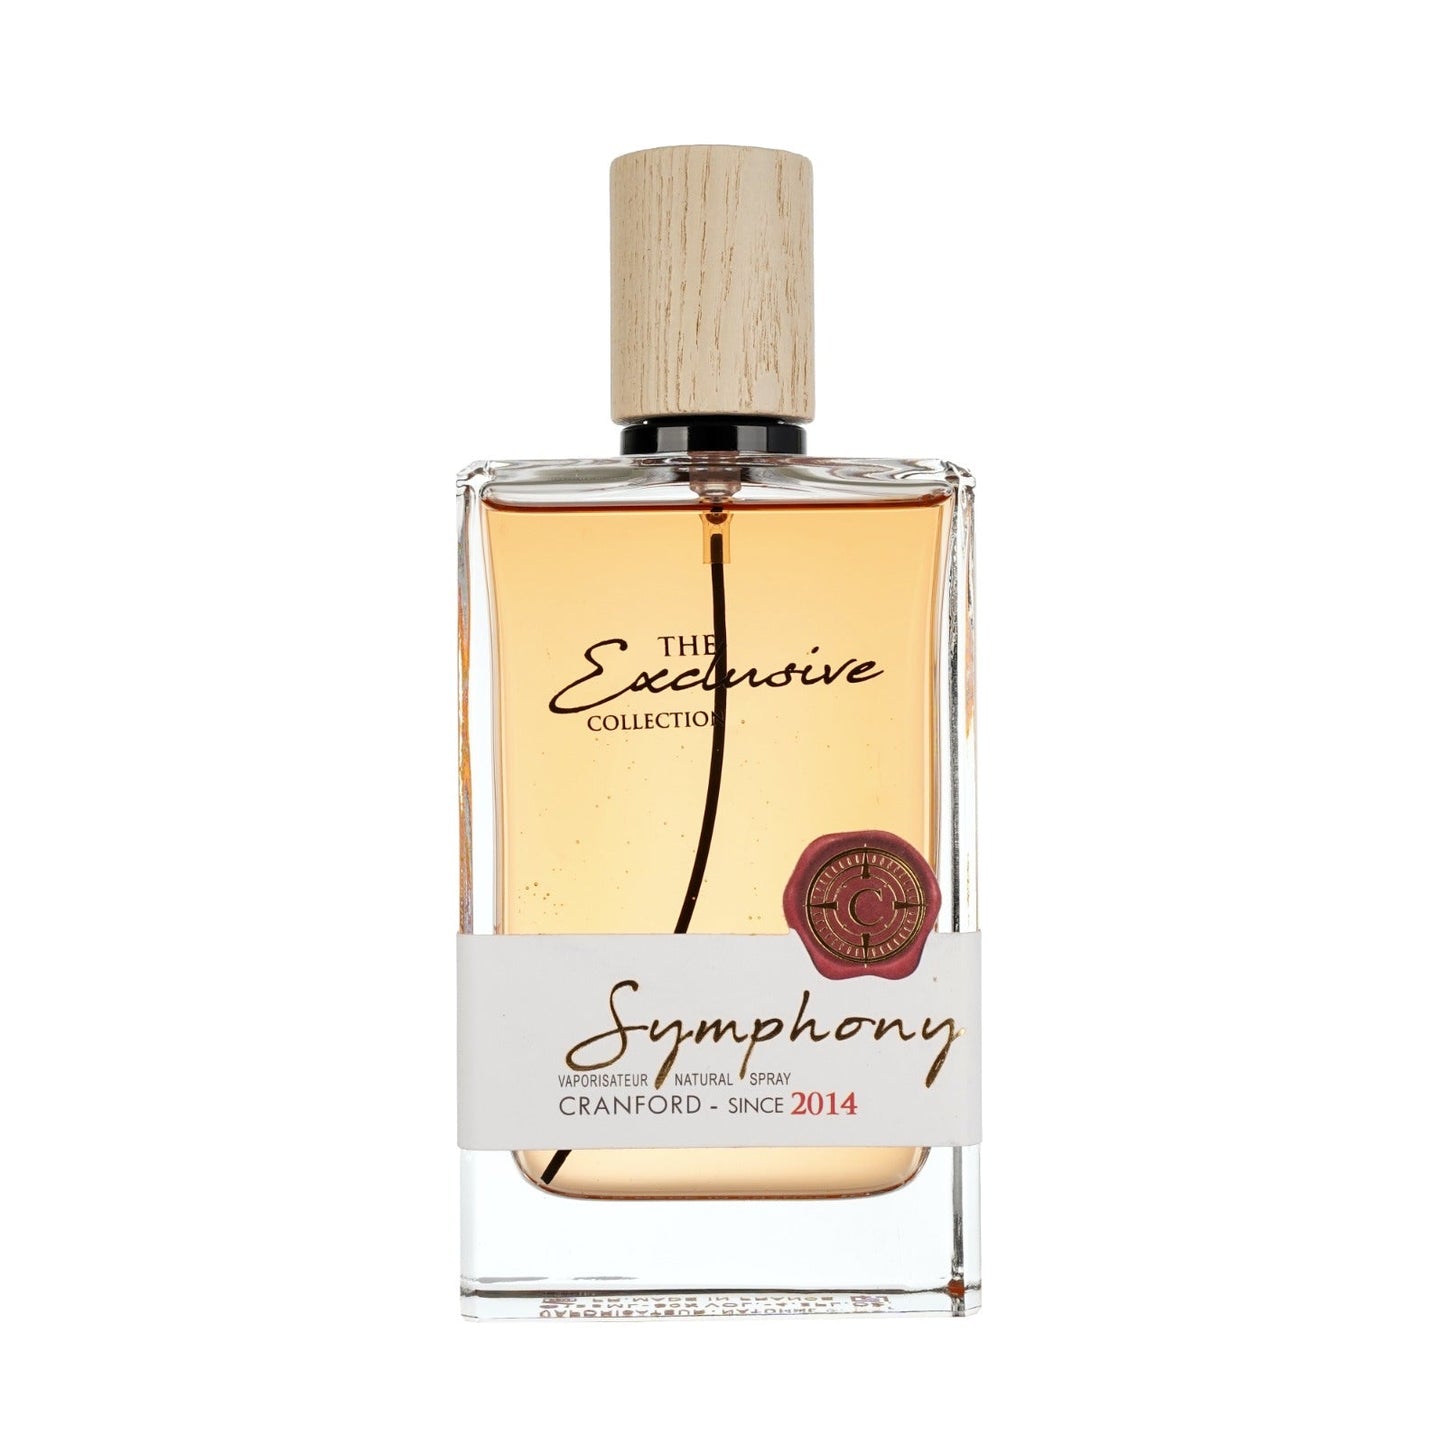 CRANFORD THE EXCLUSIVE COLLECTION SYMPHONY EDP 125ML